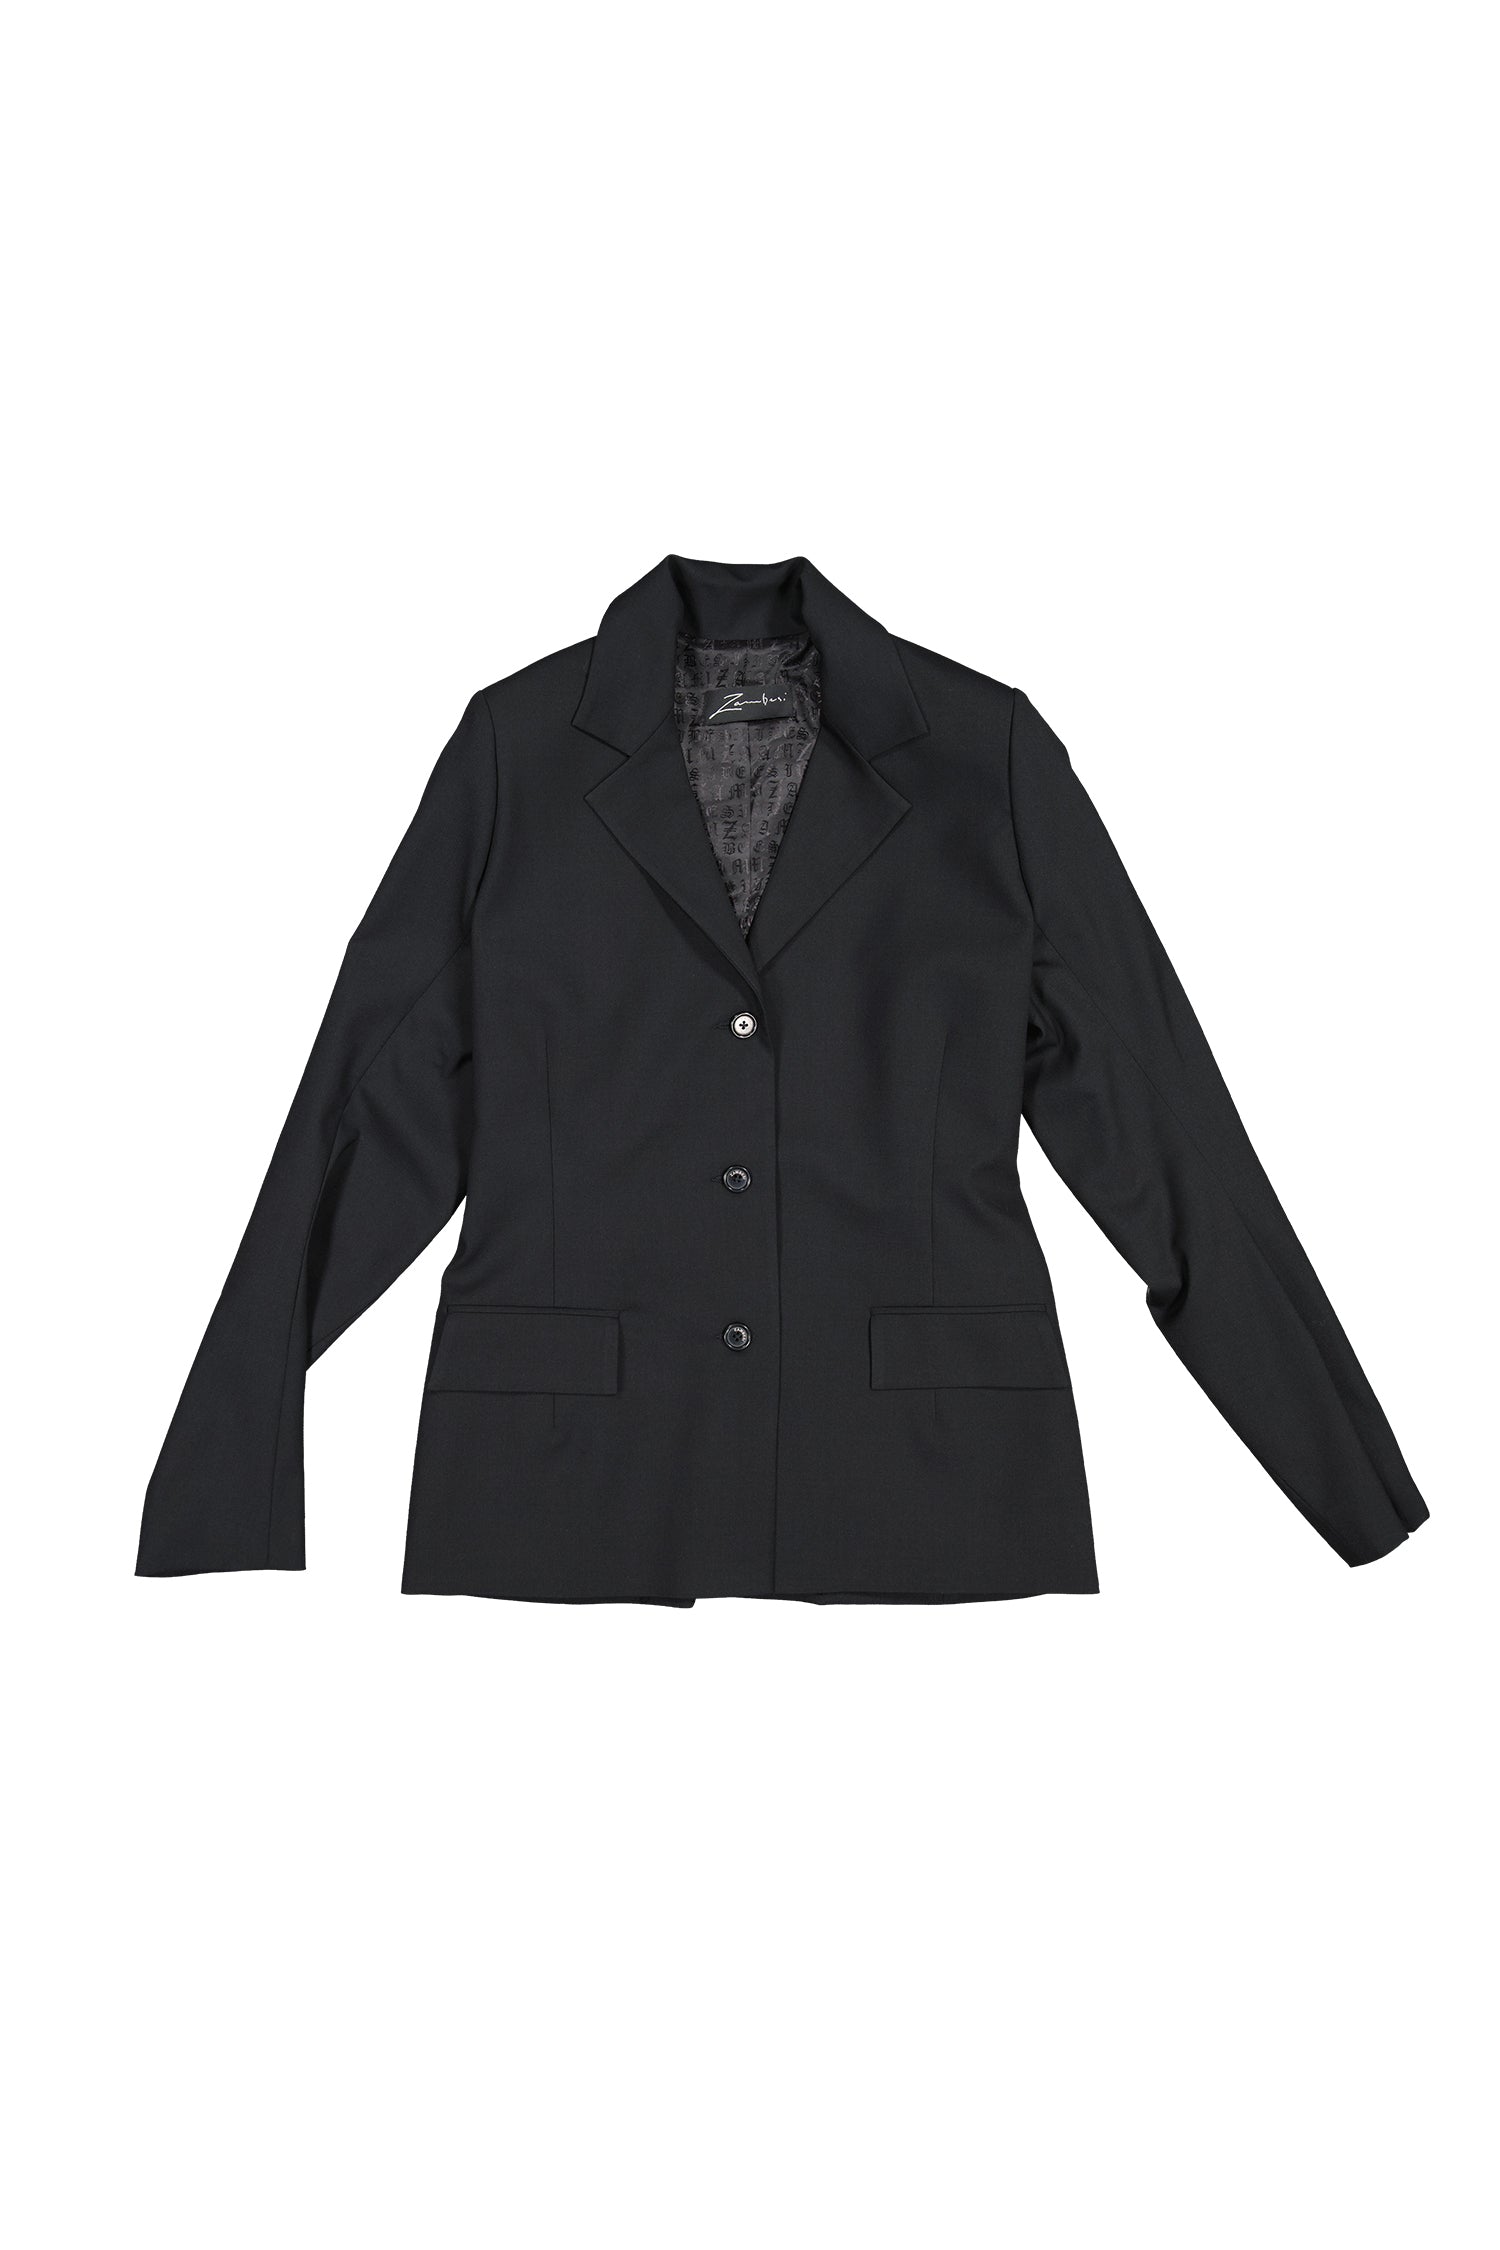 SUITED JACKET IN SUITBLACK, W22